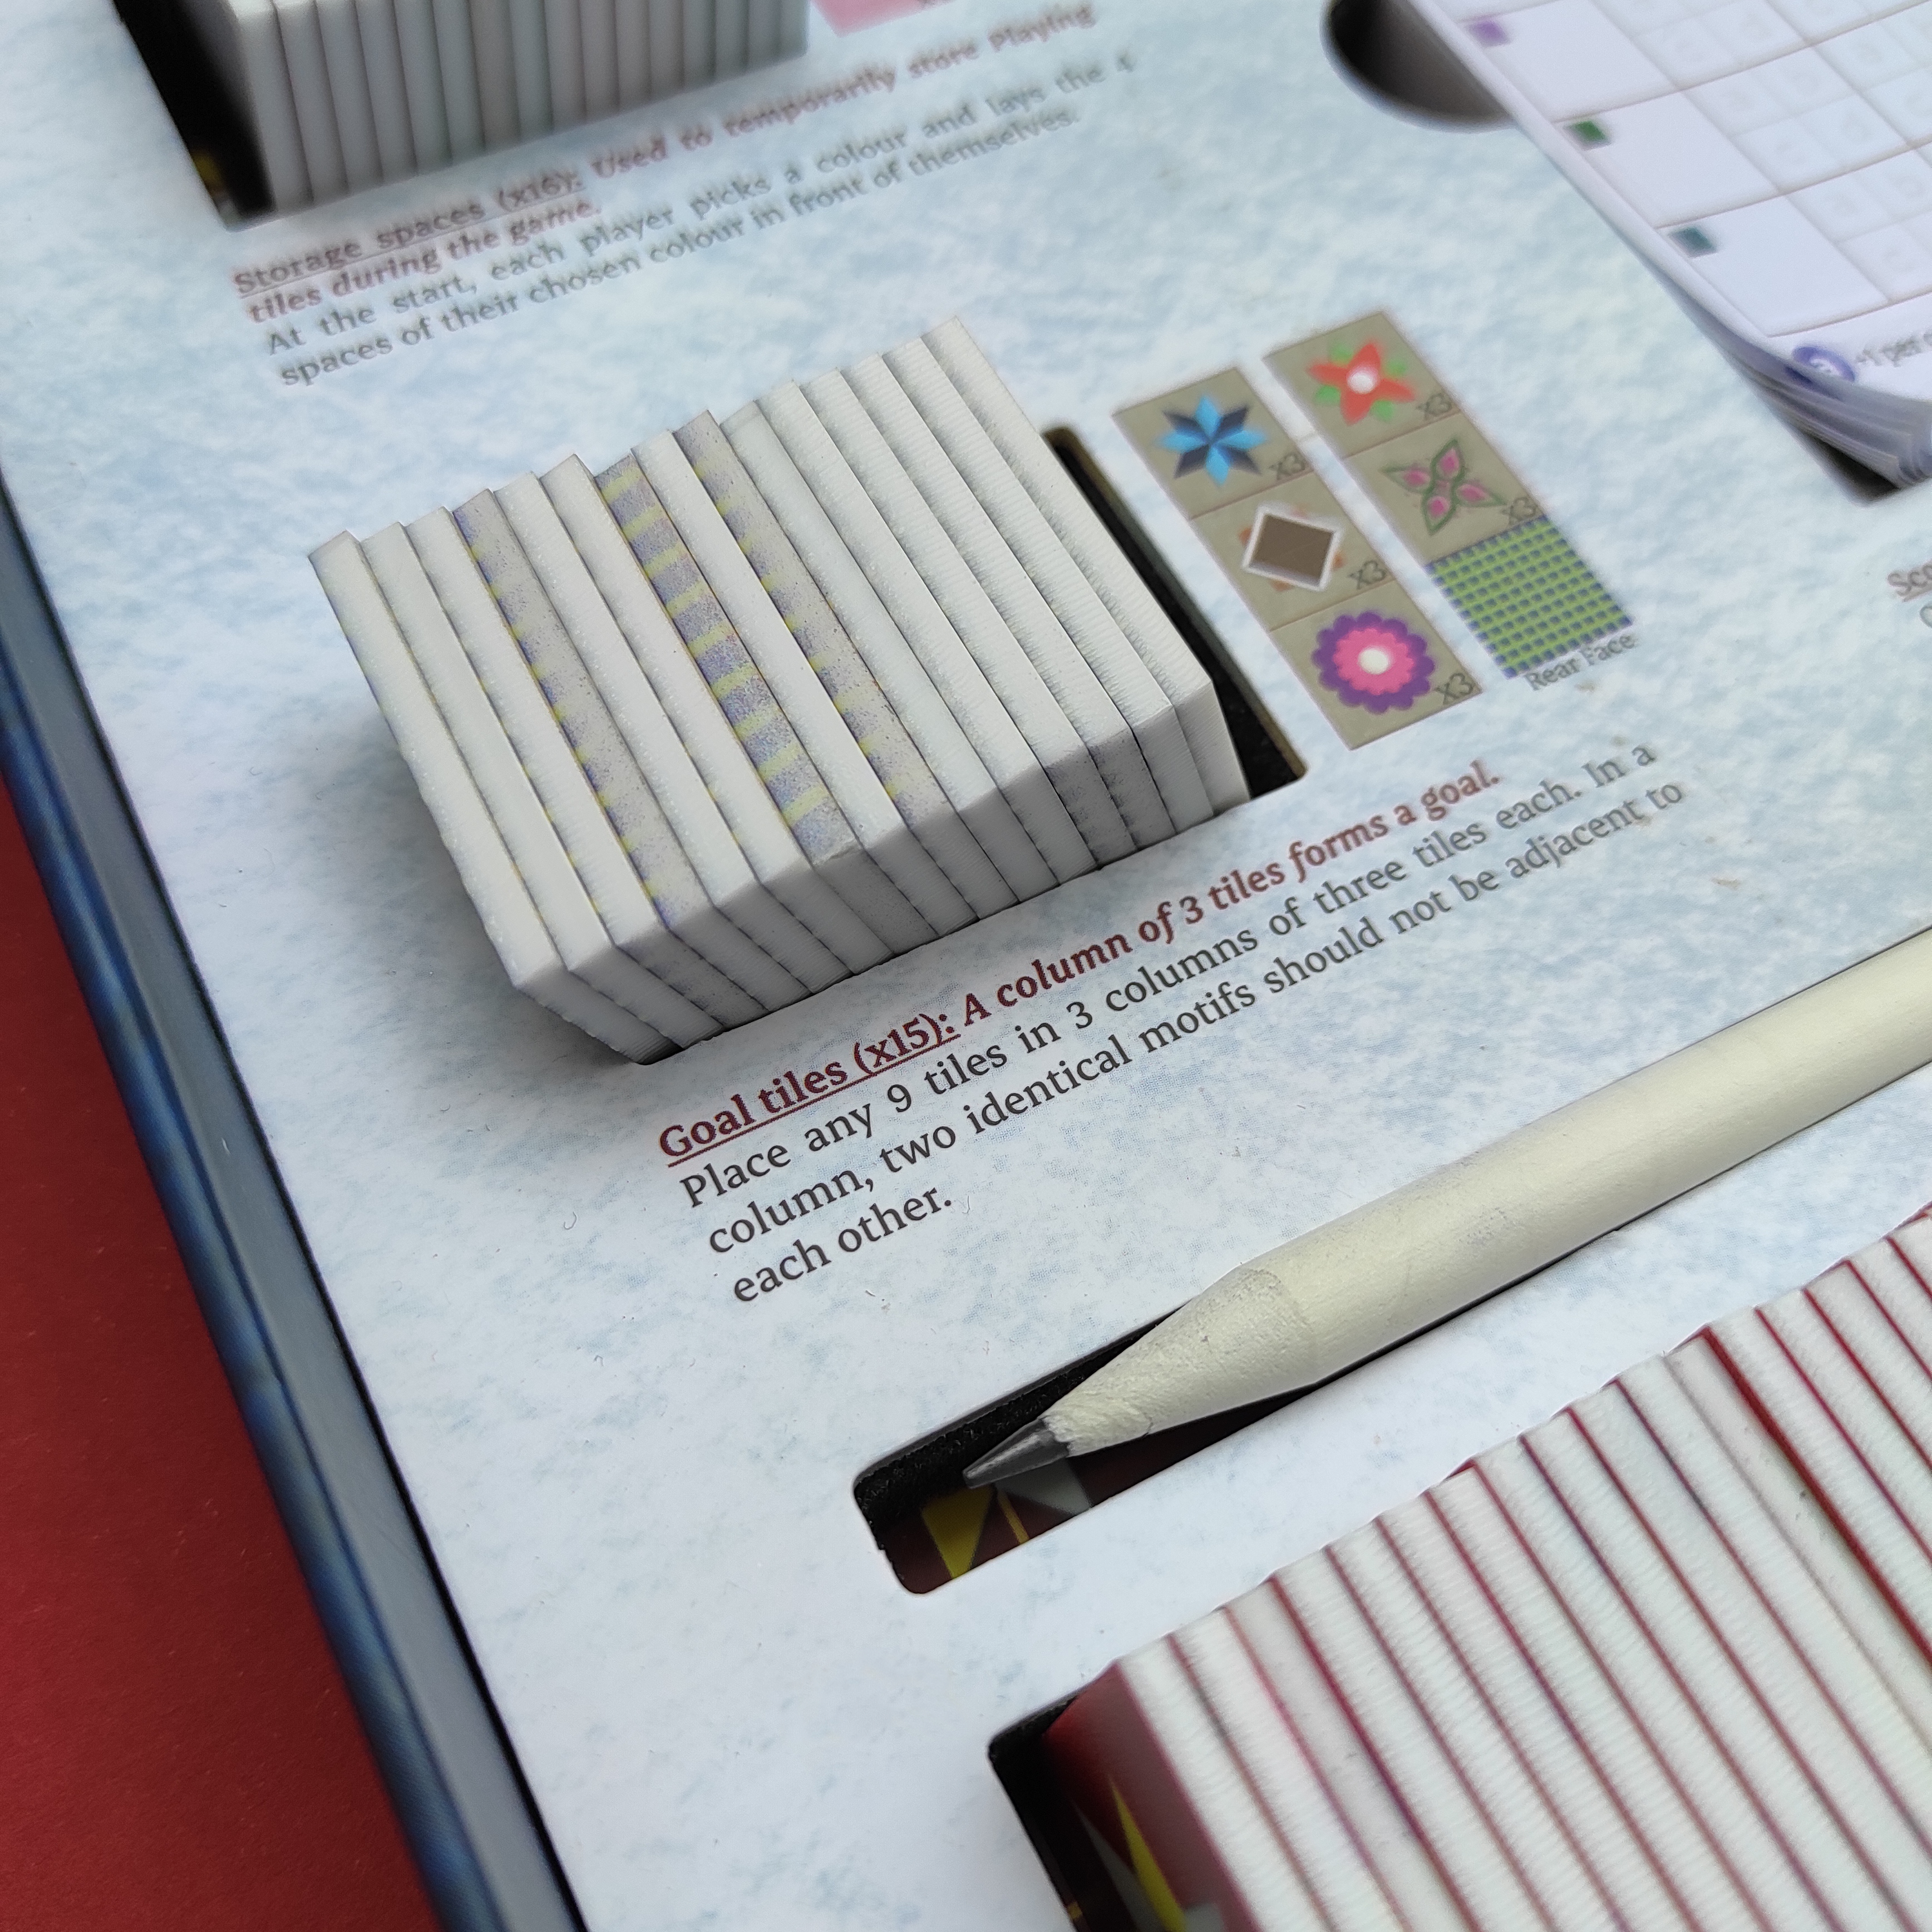 Close up image of "Rulebox" of the boardgame Athangudi: Artisans of Chettinad. The image is a close up of the interior insert of the game box. Instructions on how to set up game components are visible on the inside of the box, next to the components. 